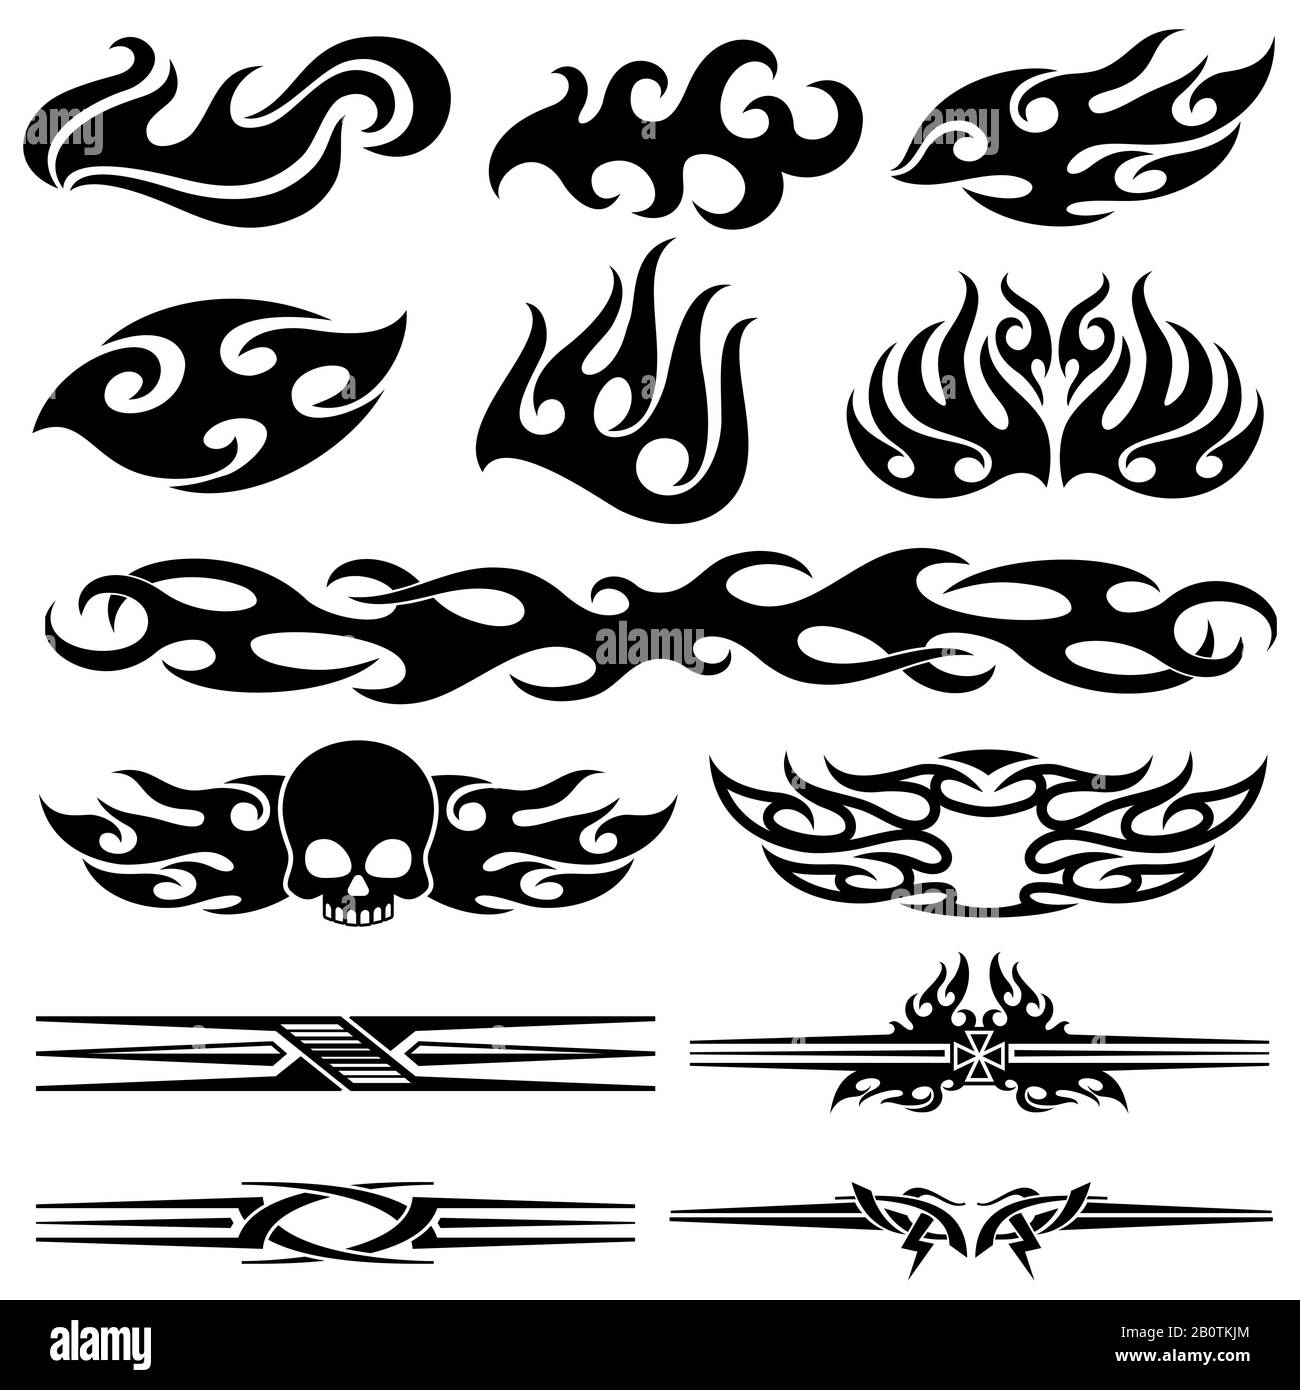 620 Bike Tribal Tattoos Royalty-Free Images, Stock Photos & Pictures |  Shutterstock